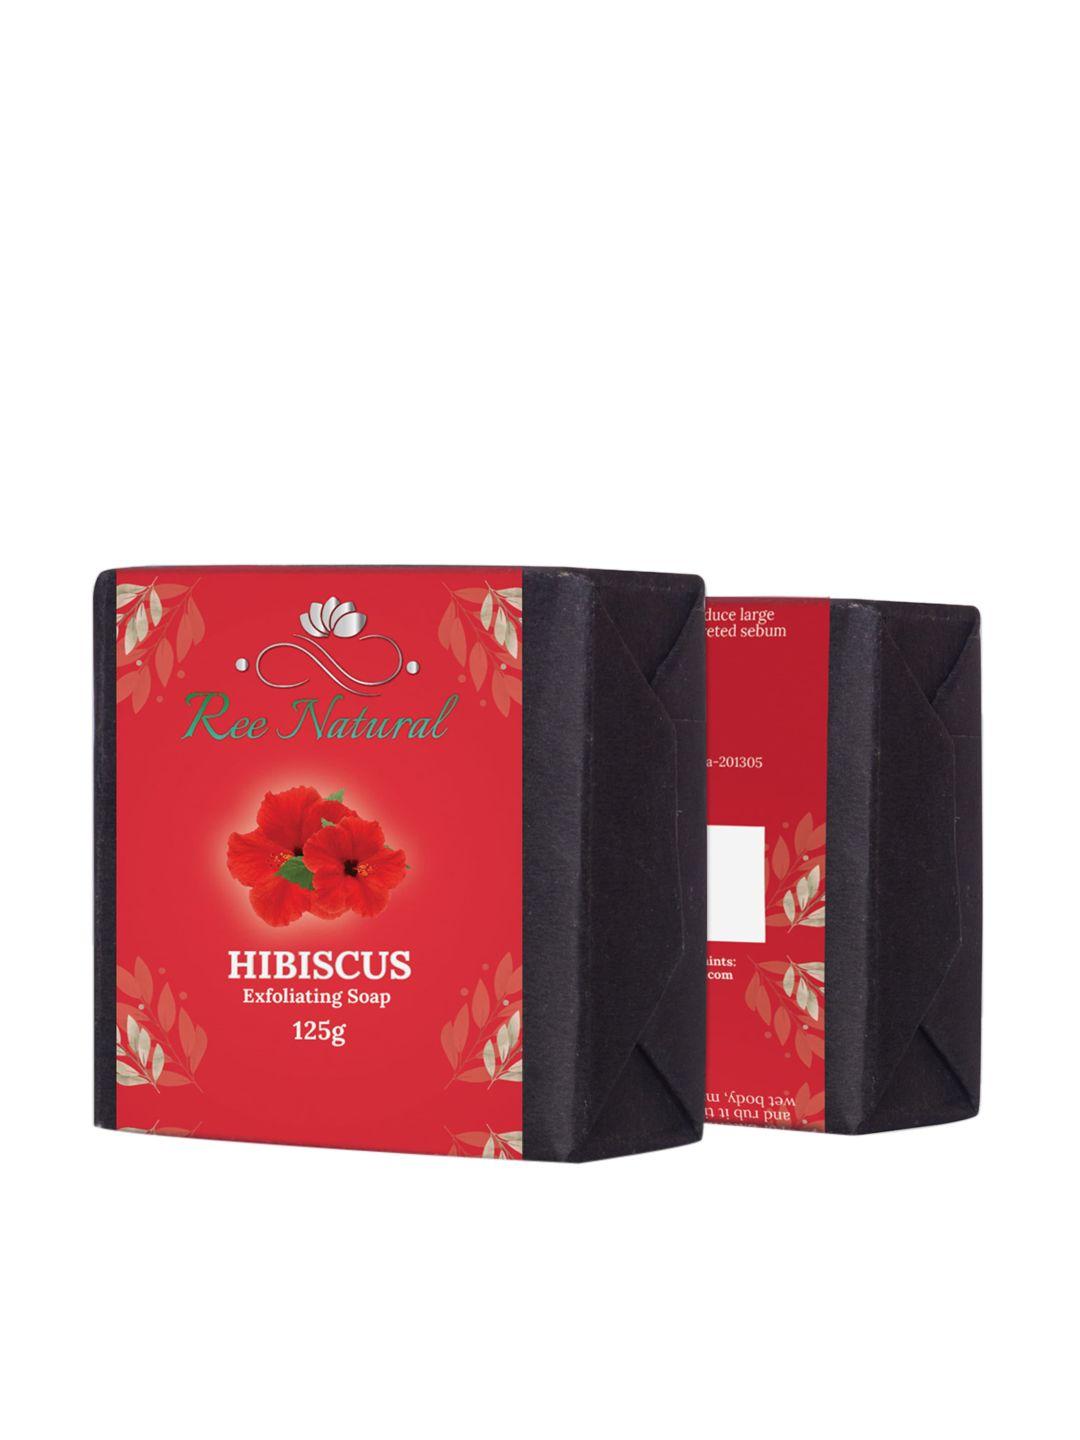 ree natural cold processed hibiscus exfoliating soap - 125g